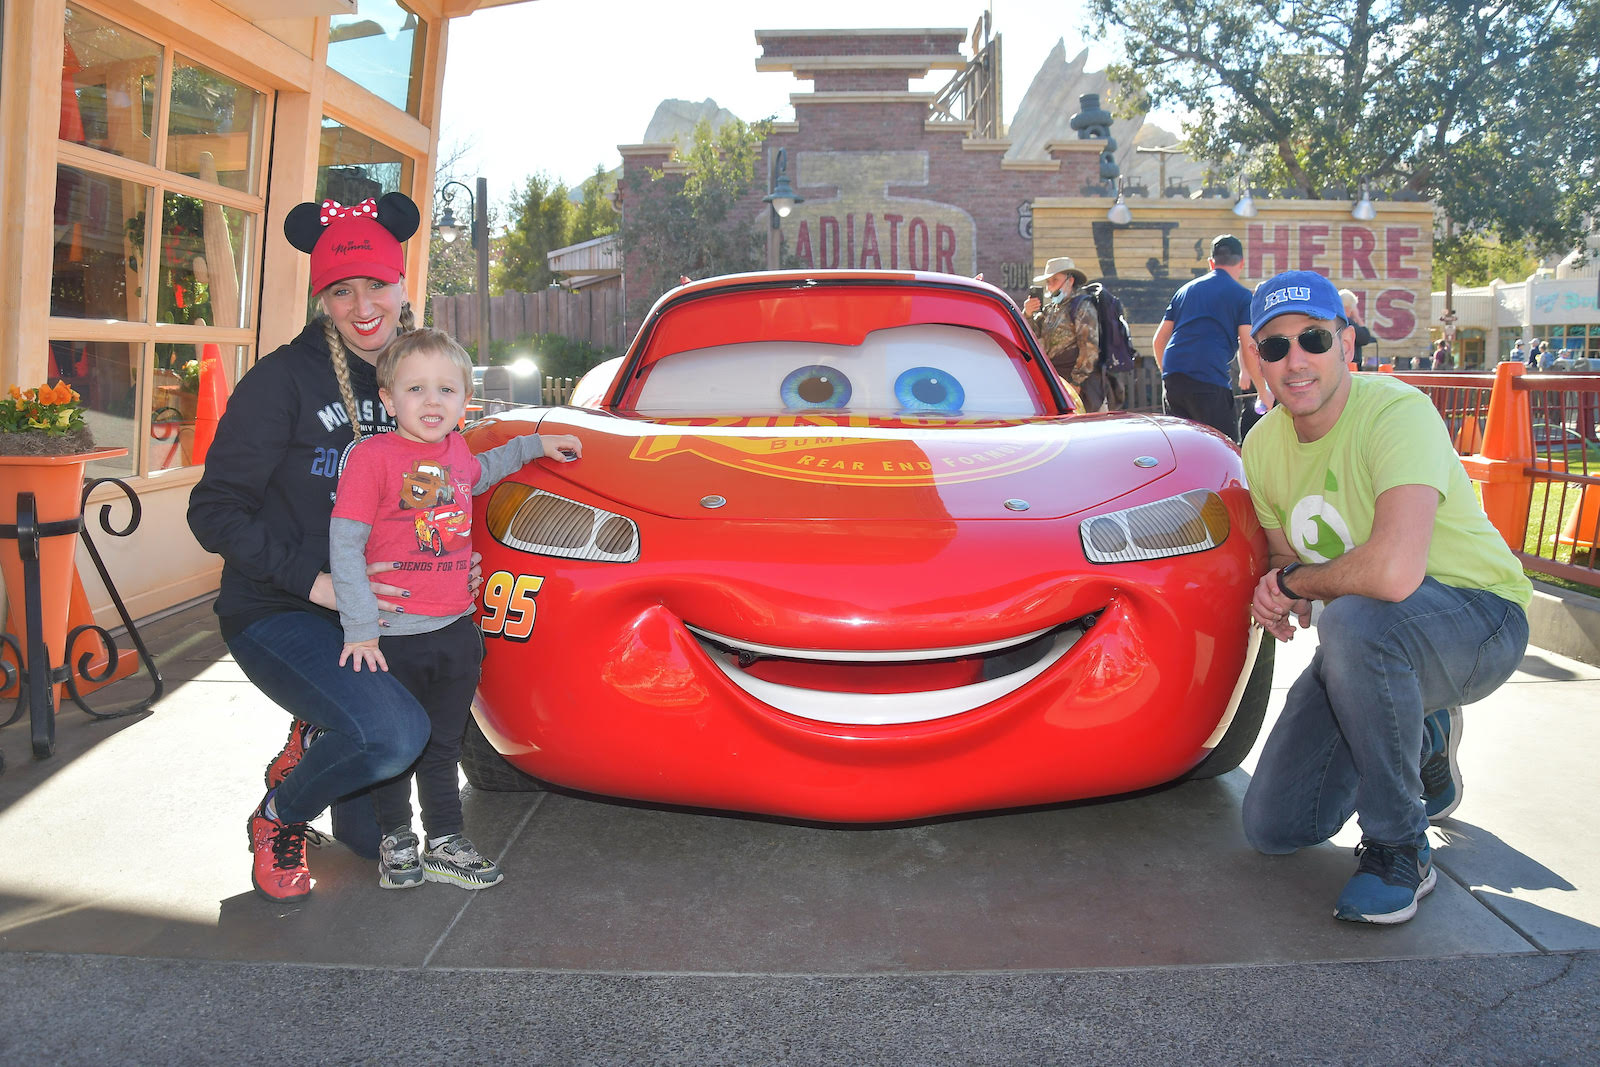 Tips for a Great Trip to California Adventure with a Toddler